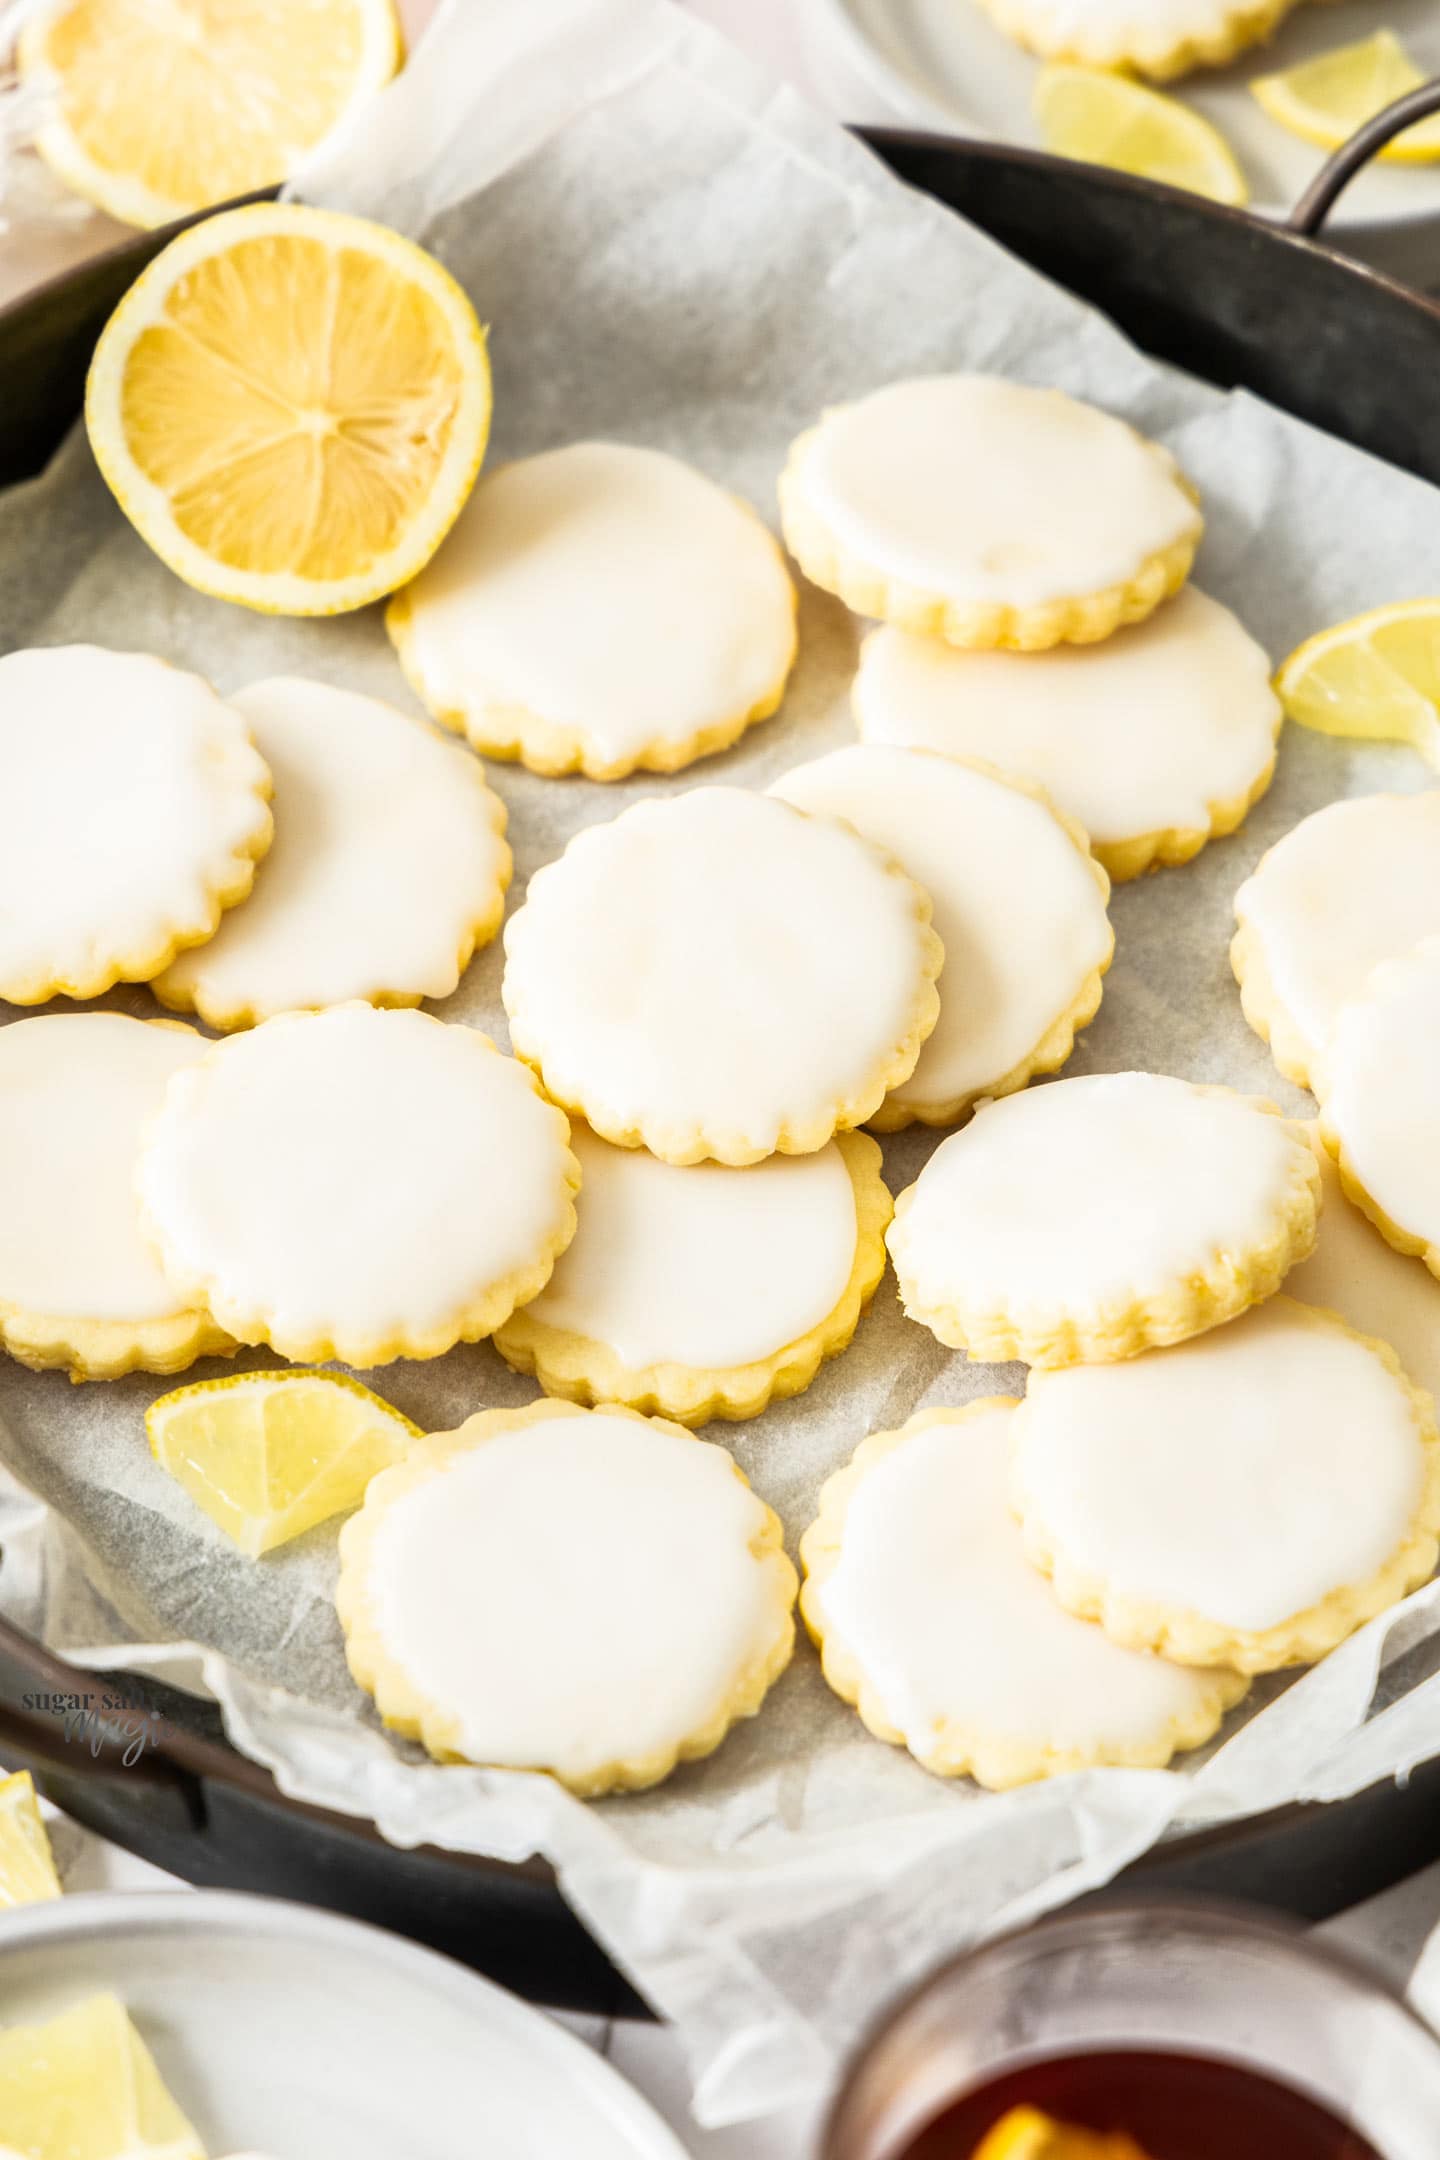 A batch of iced lemon biscuits.